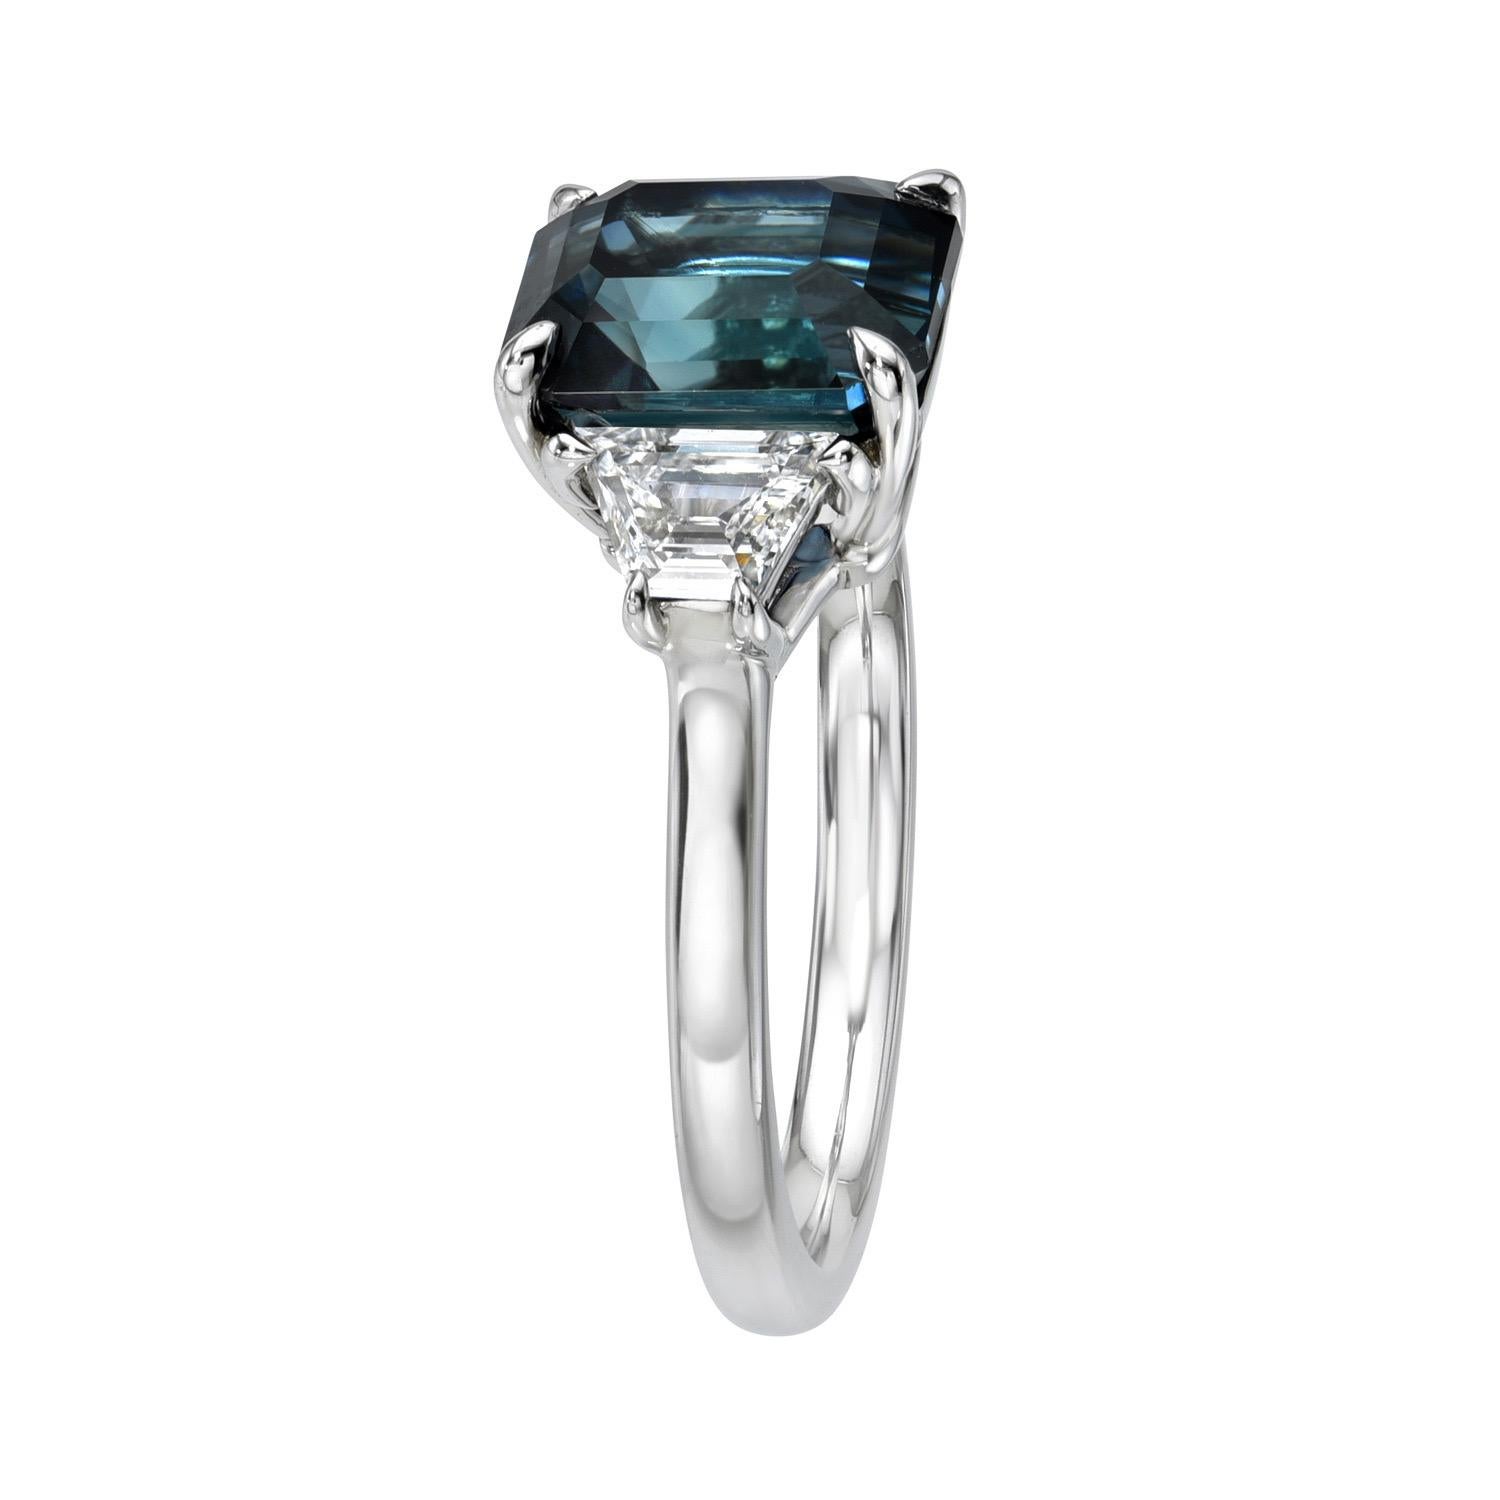 Unique and exotic 4.16 carat Ceylon Teal Sapphire Emerald-Cut, three stone platinum ring, flanked by a pair of 0.57 carat, D/VS2-SI1 Trapezoid diamonds.
Ring size 6. Resizing is complementary upon request.
The GIA gem report is attached to the image